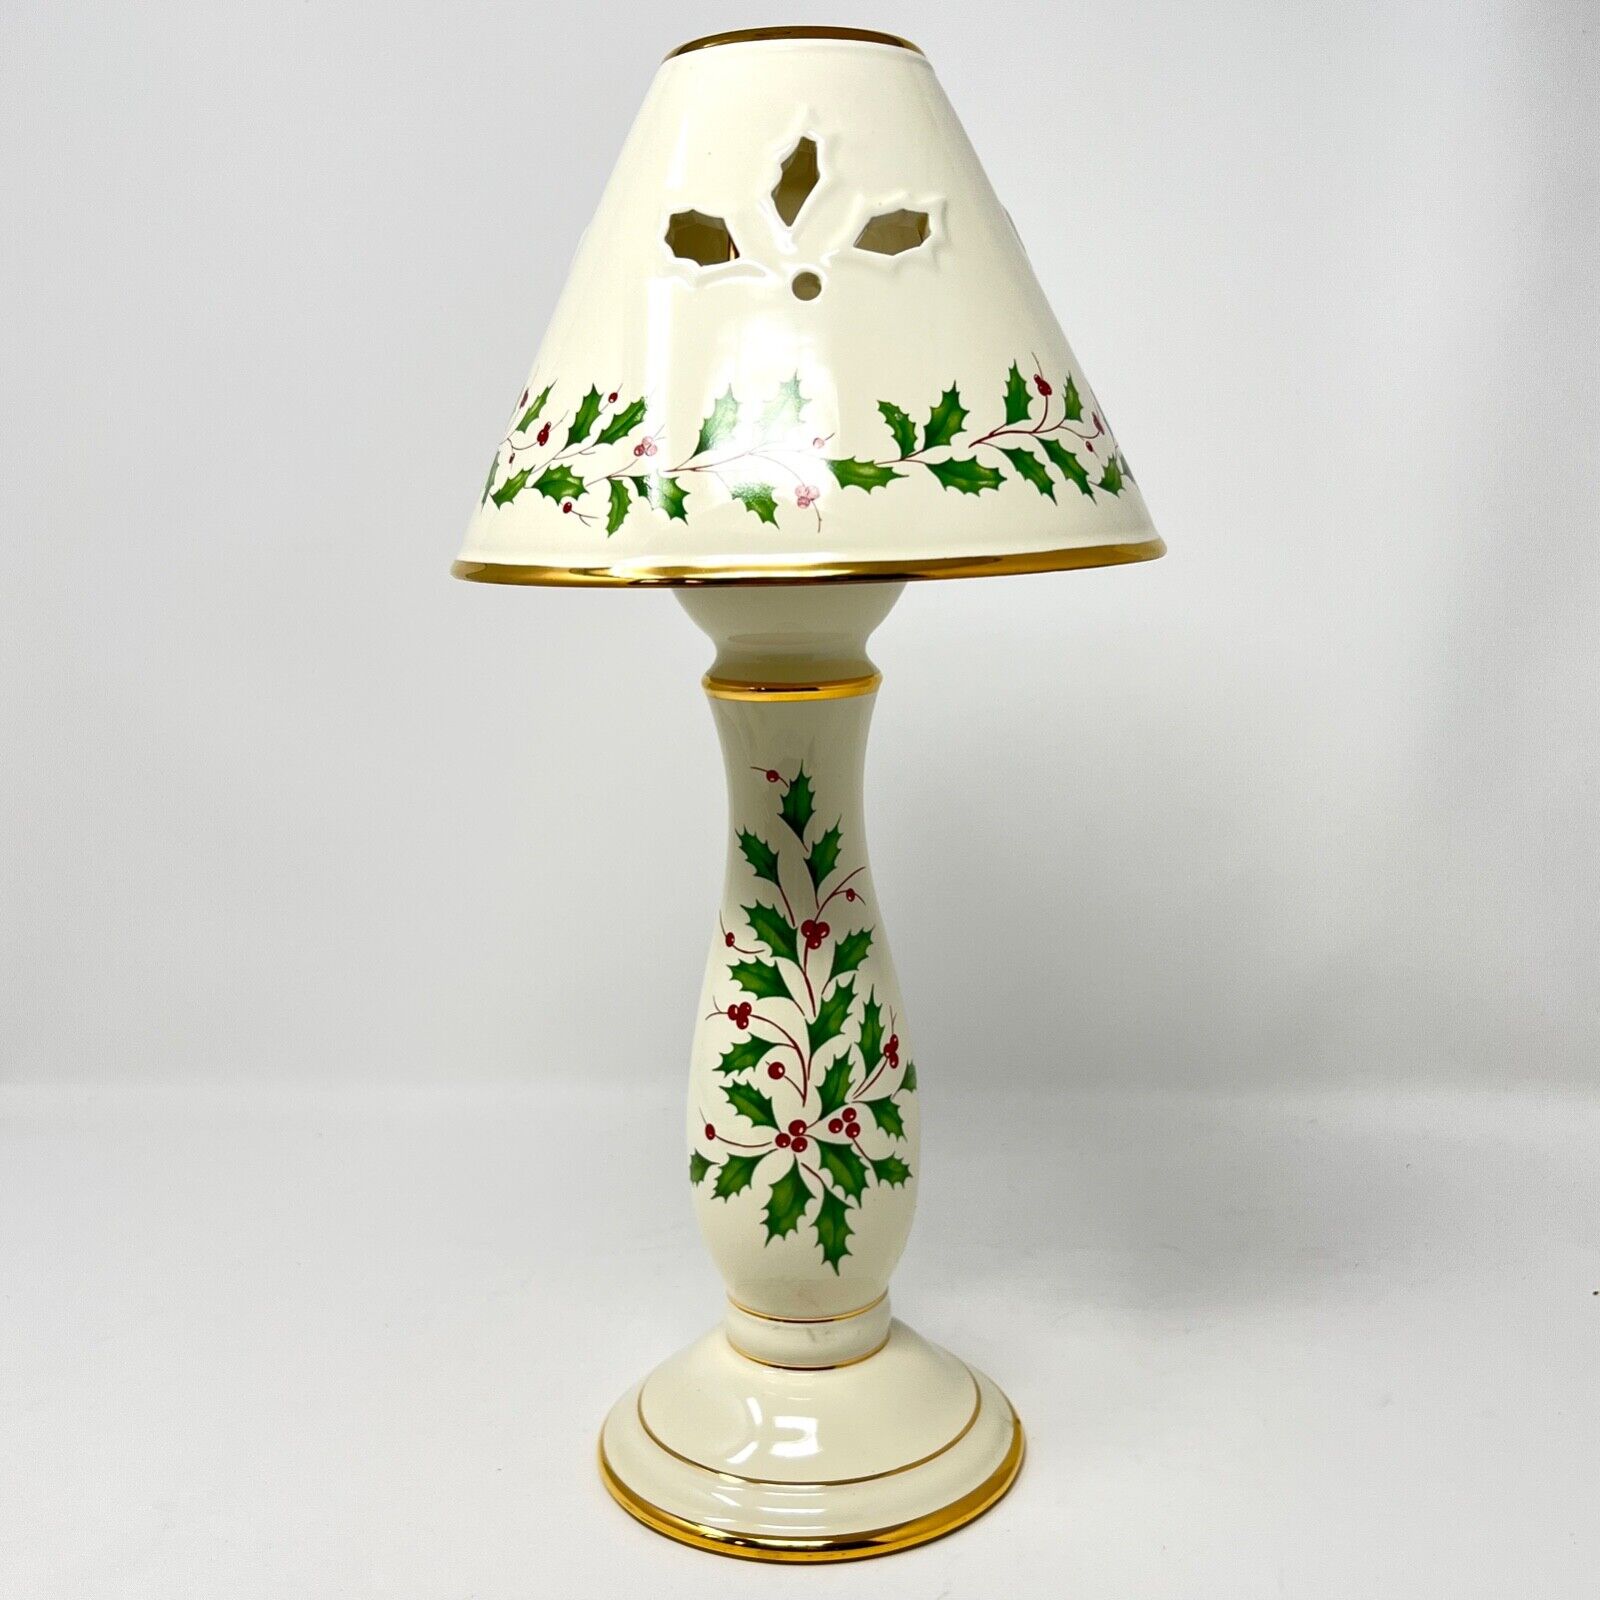 Lenox Holiday  Candle Lamp Pierced Holly Berry Design 14 Inches Tall